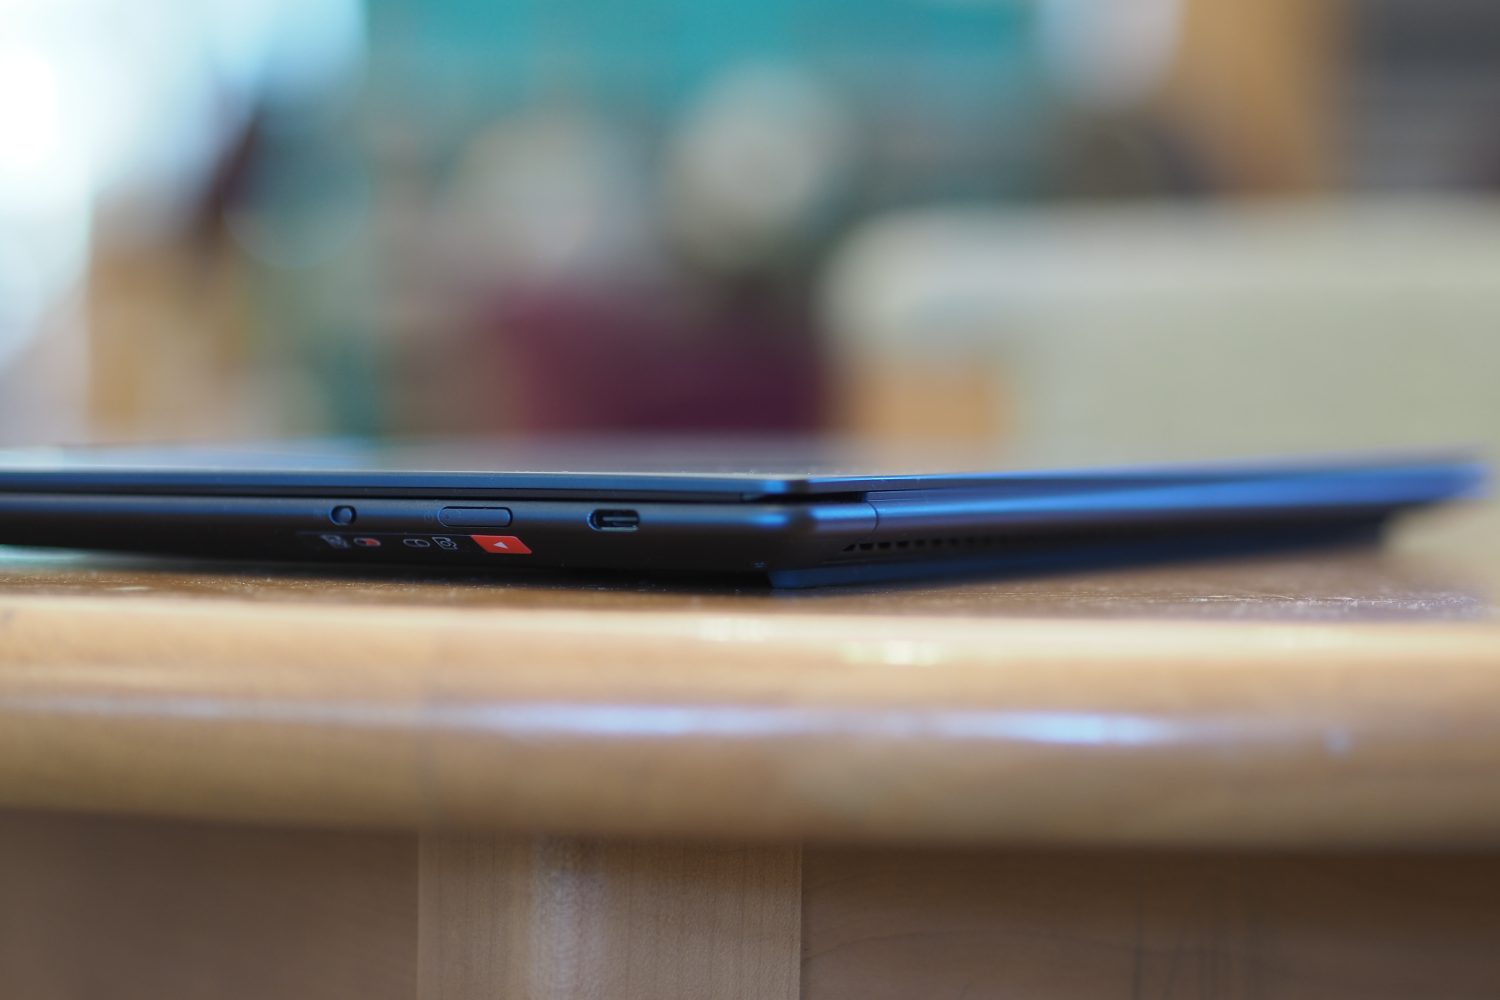 Lenovo Yoga Slim 7x side view showing ports and vents.